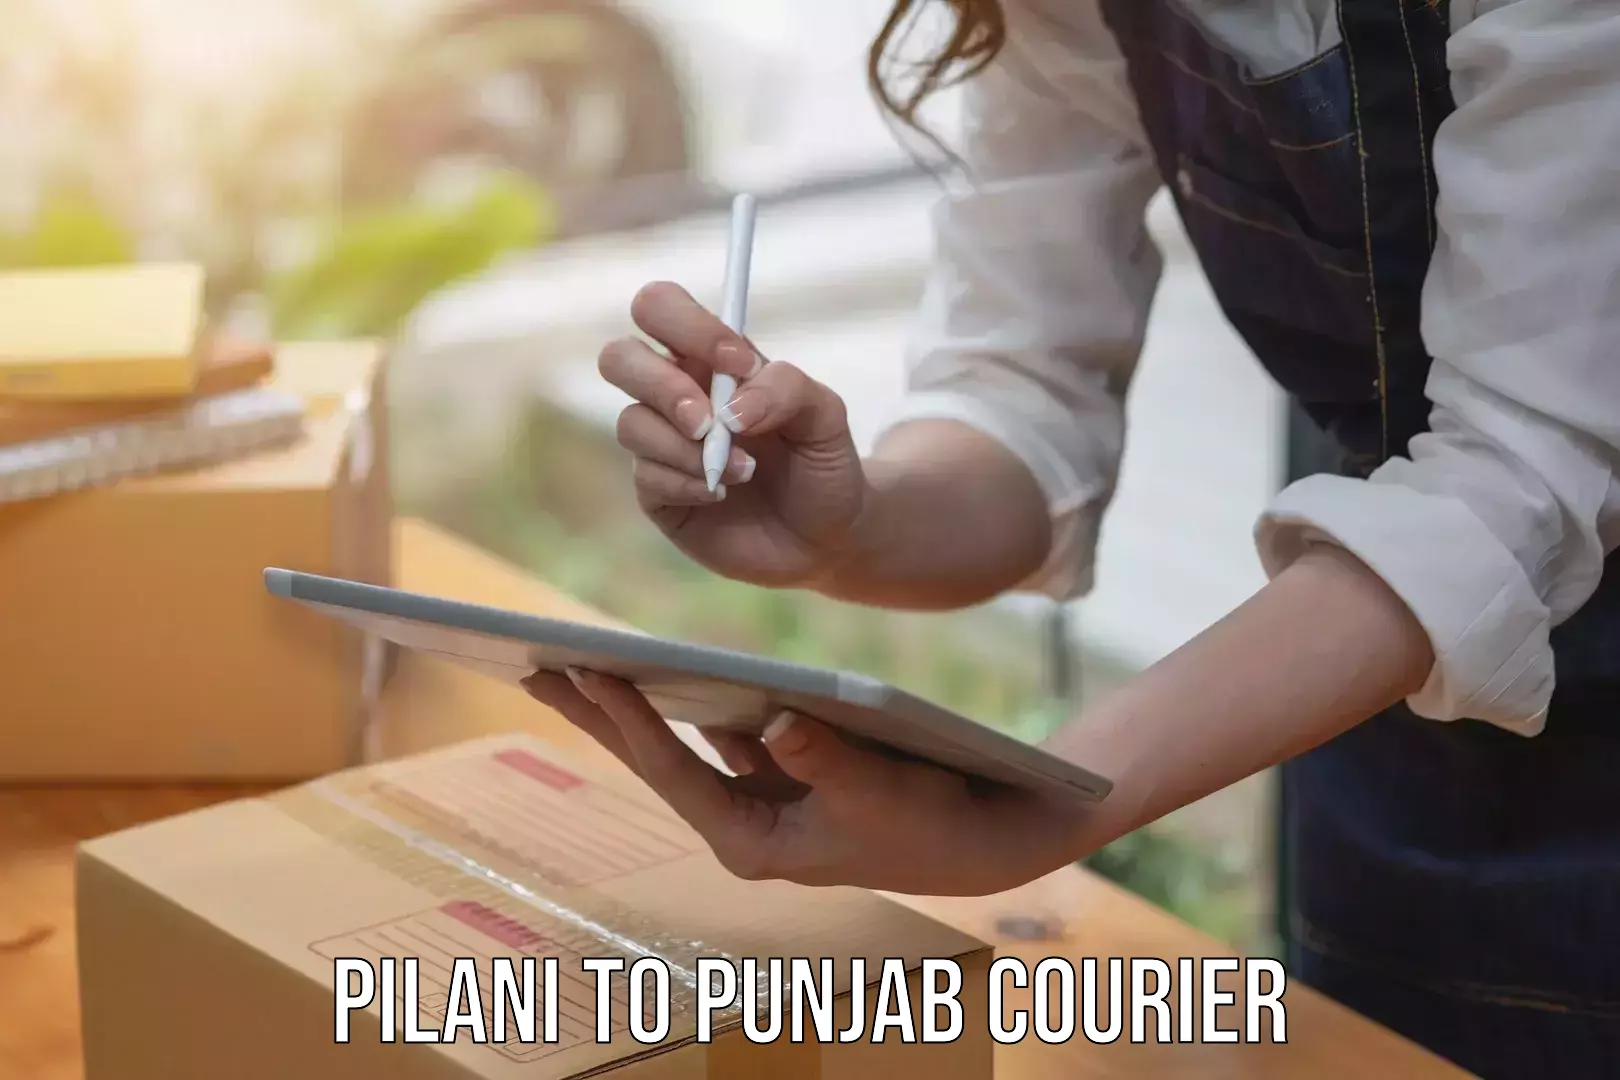 Sustainable shipping practices Pilani to Anandpur Sahib